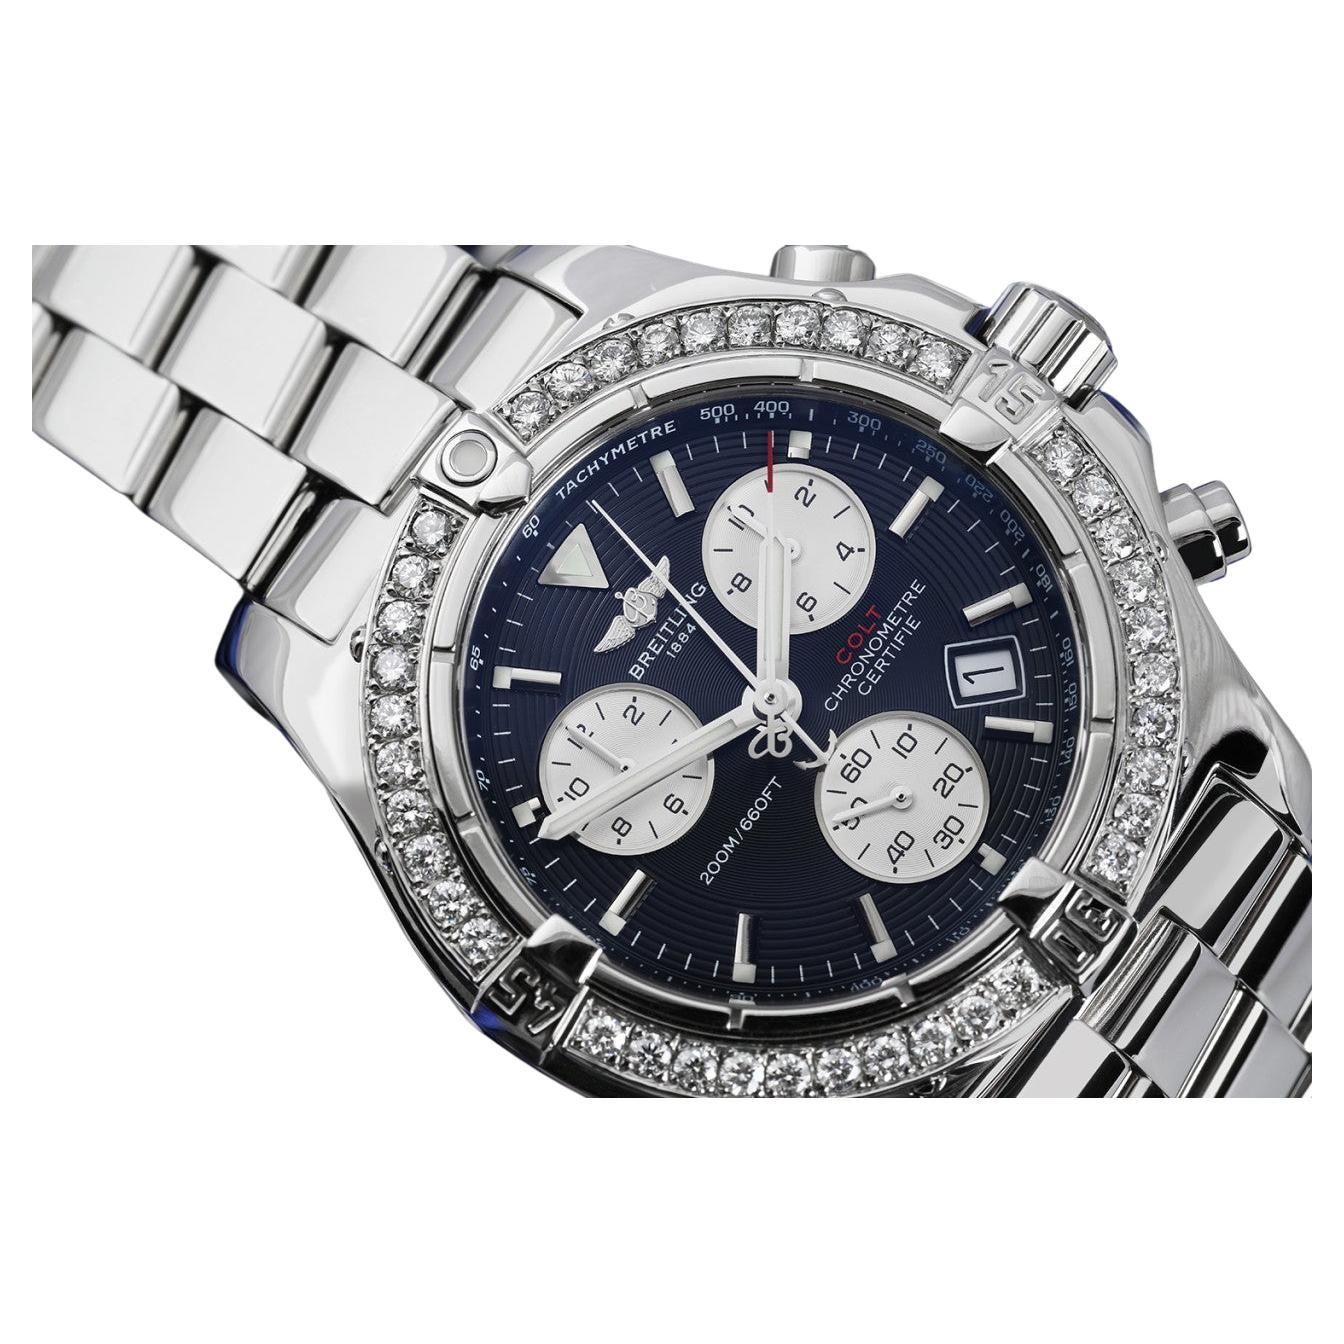 Breitling Colt Chronograph Stainless Steel Watch with Diamond Bezel Black Dial For Sale